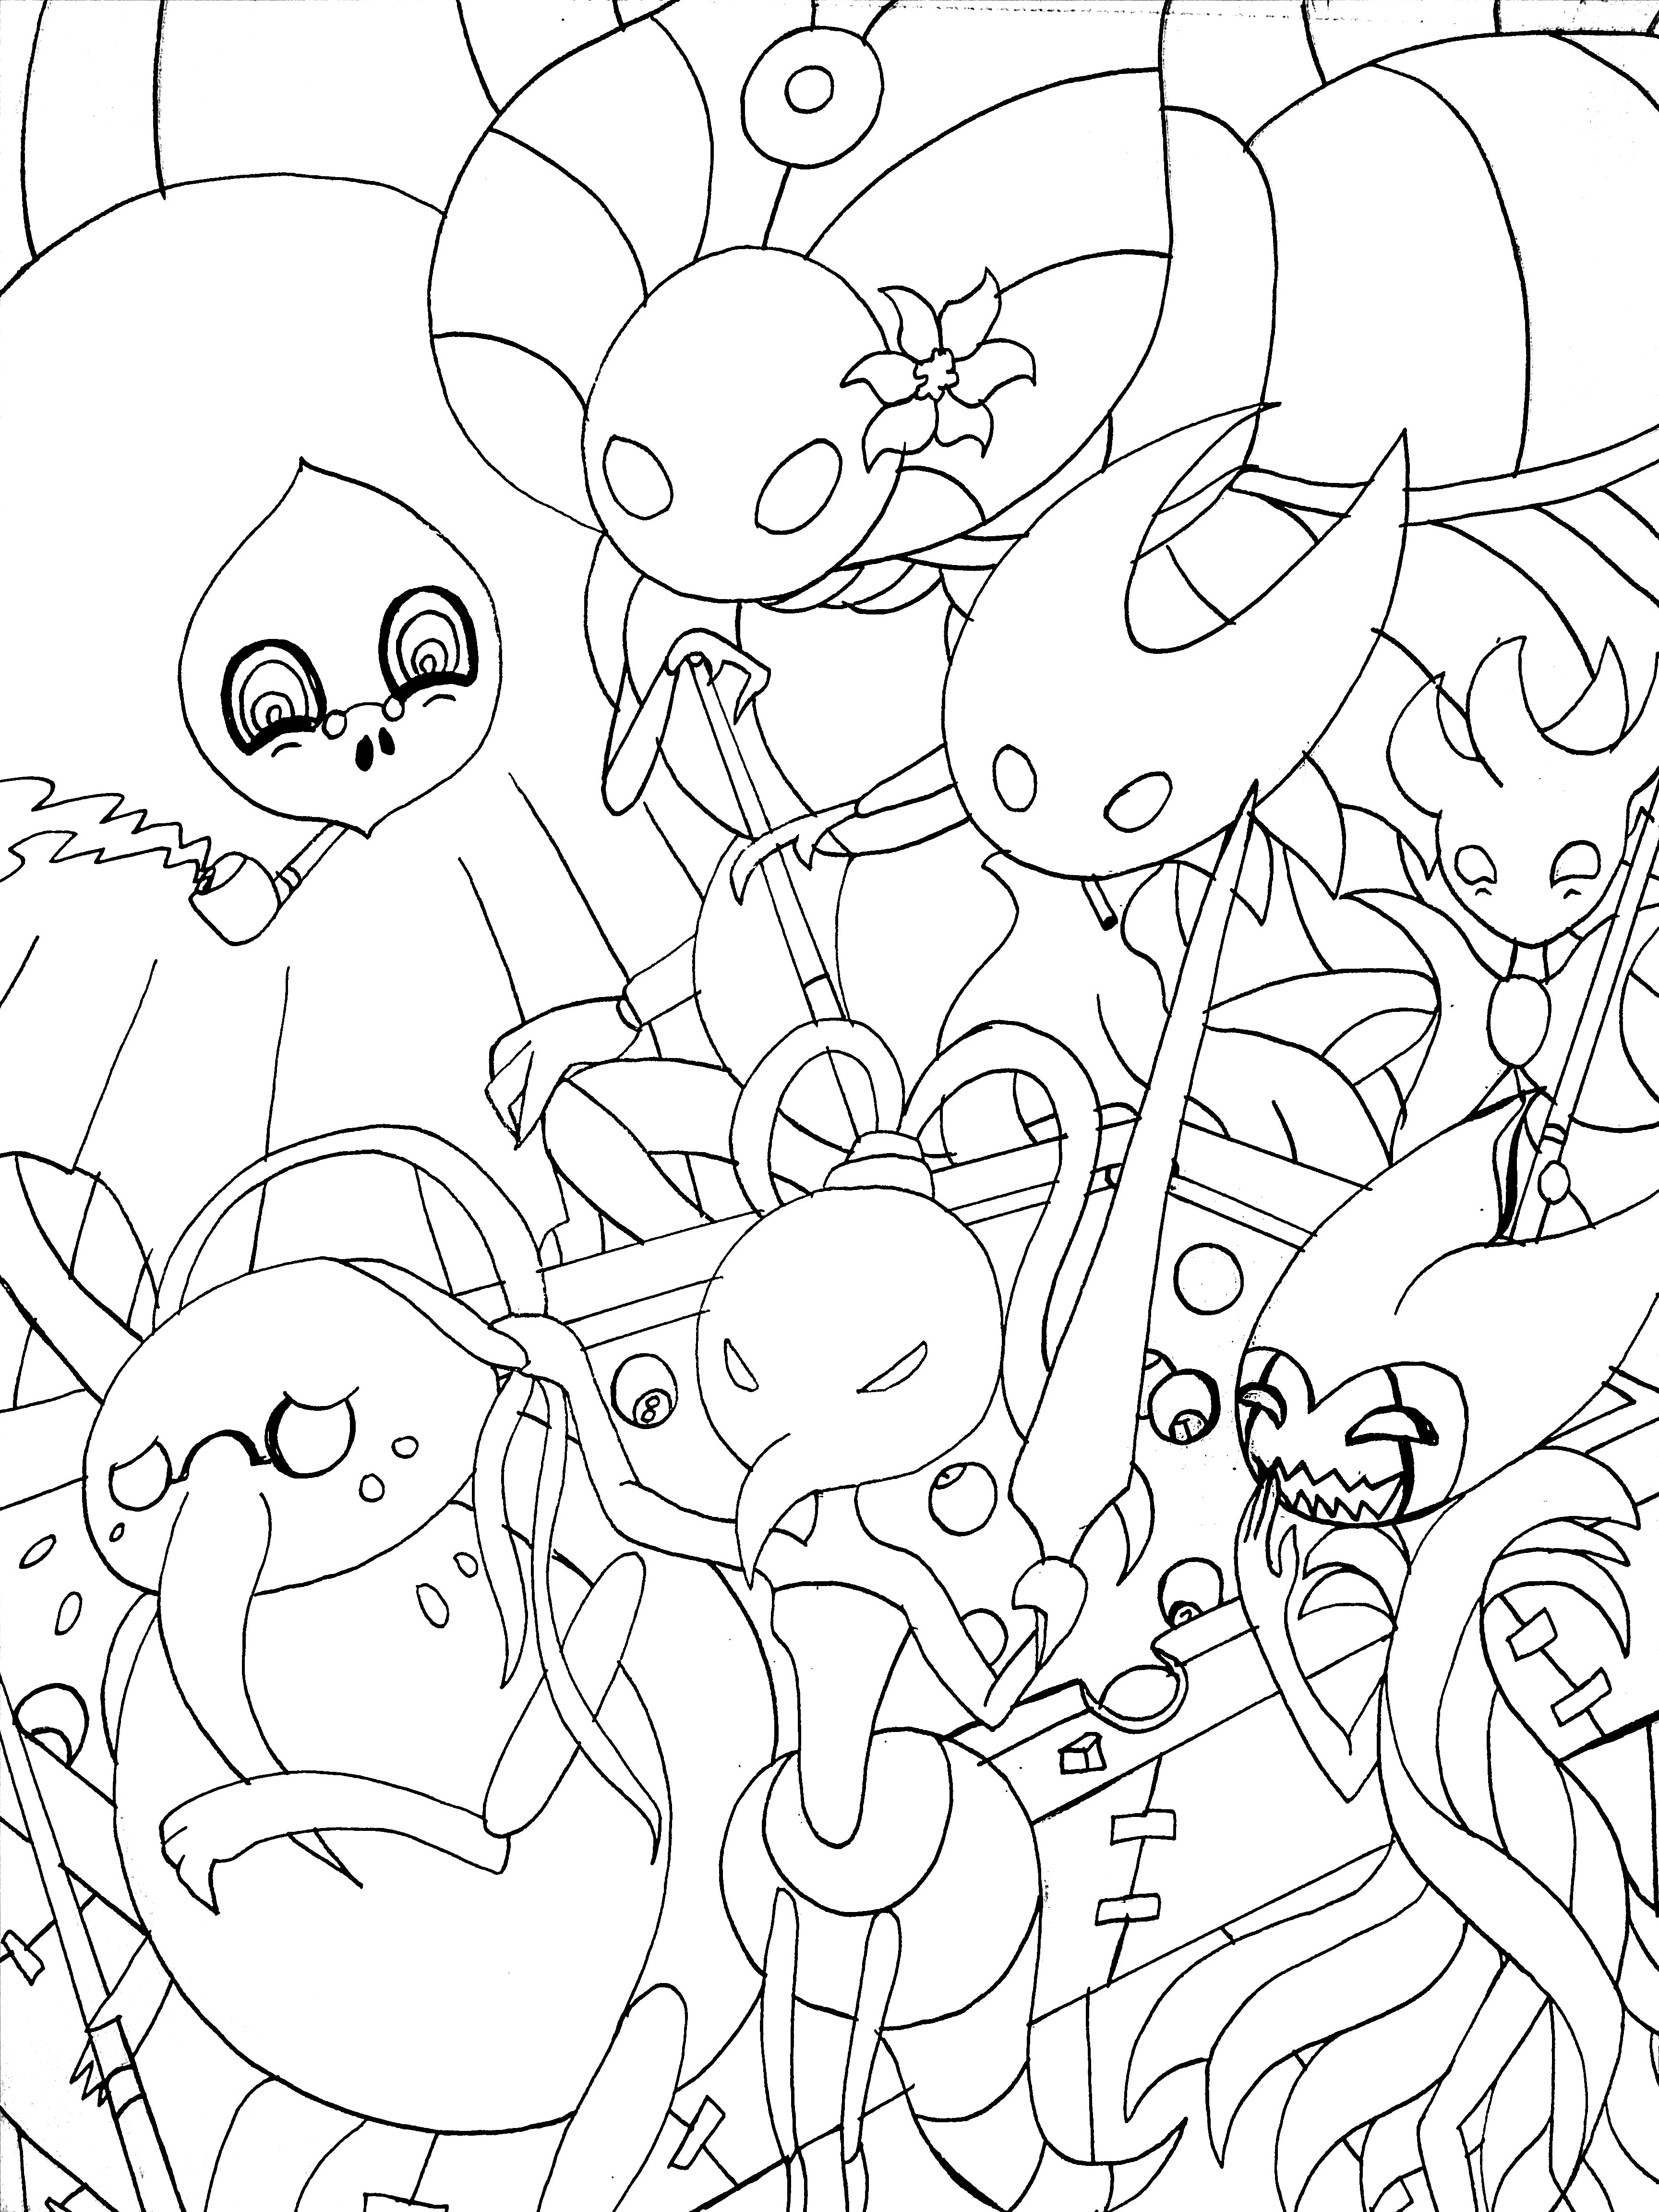 artsy sister, hollow knight lineart, hollow knight pool game